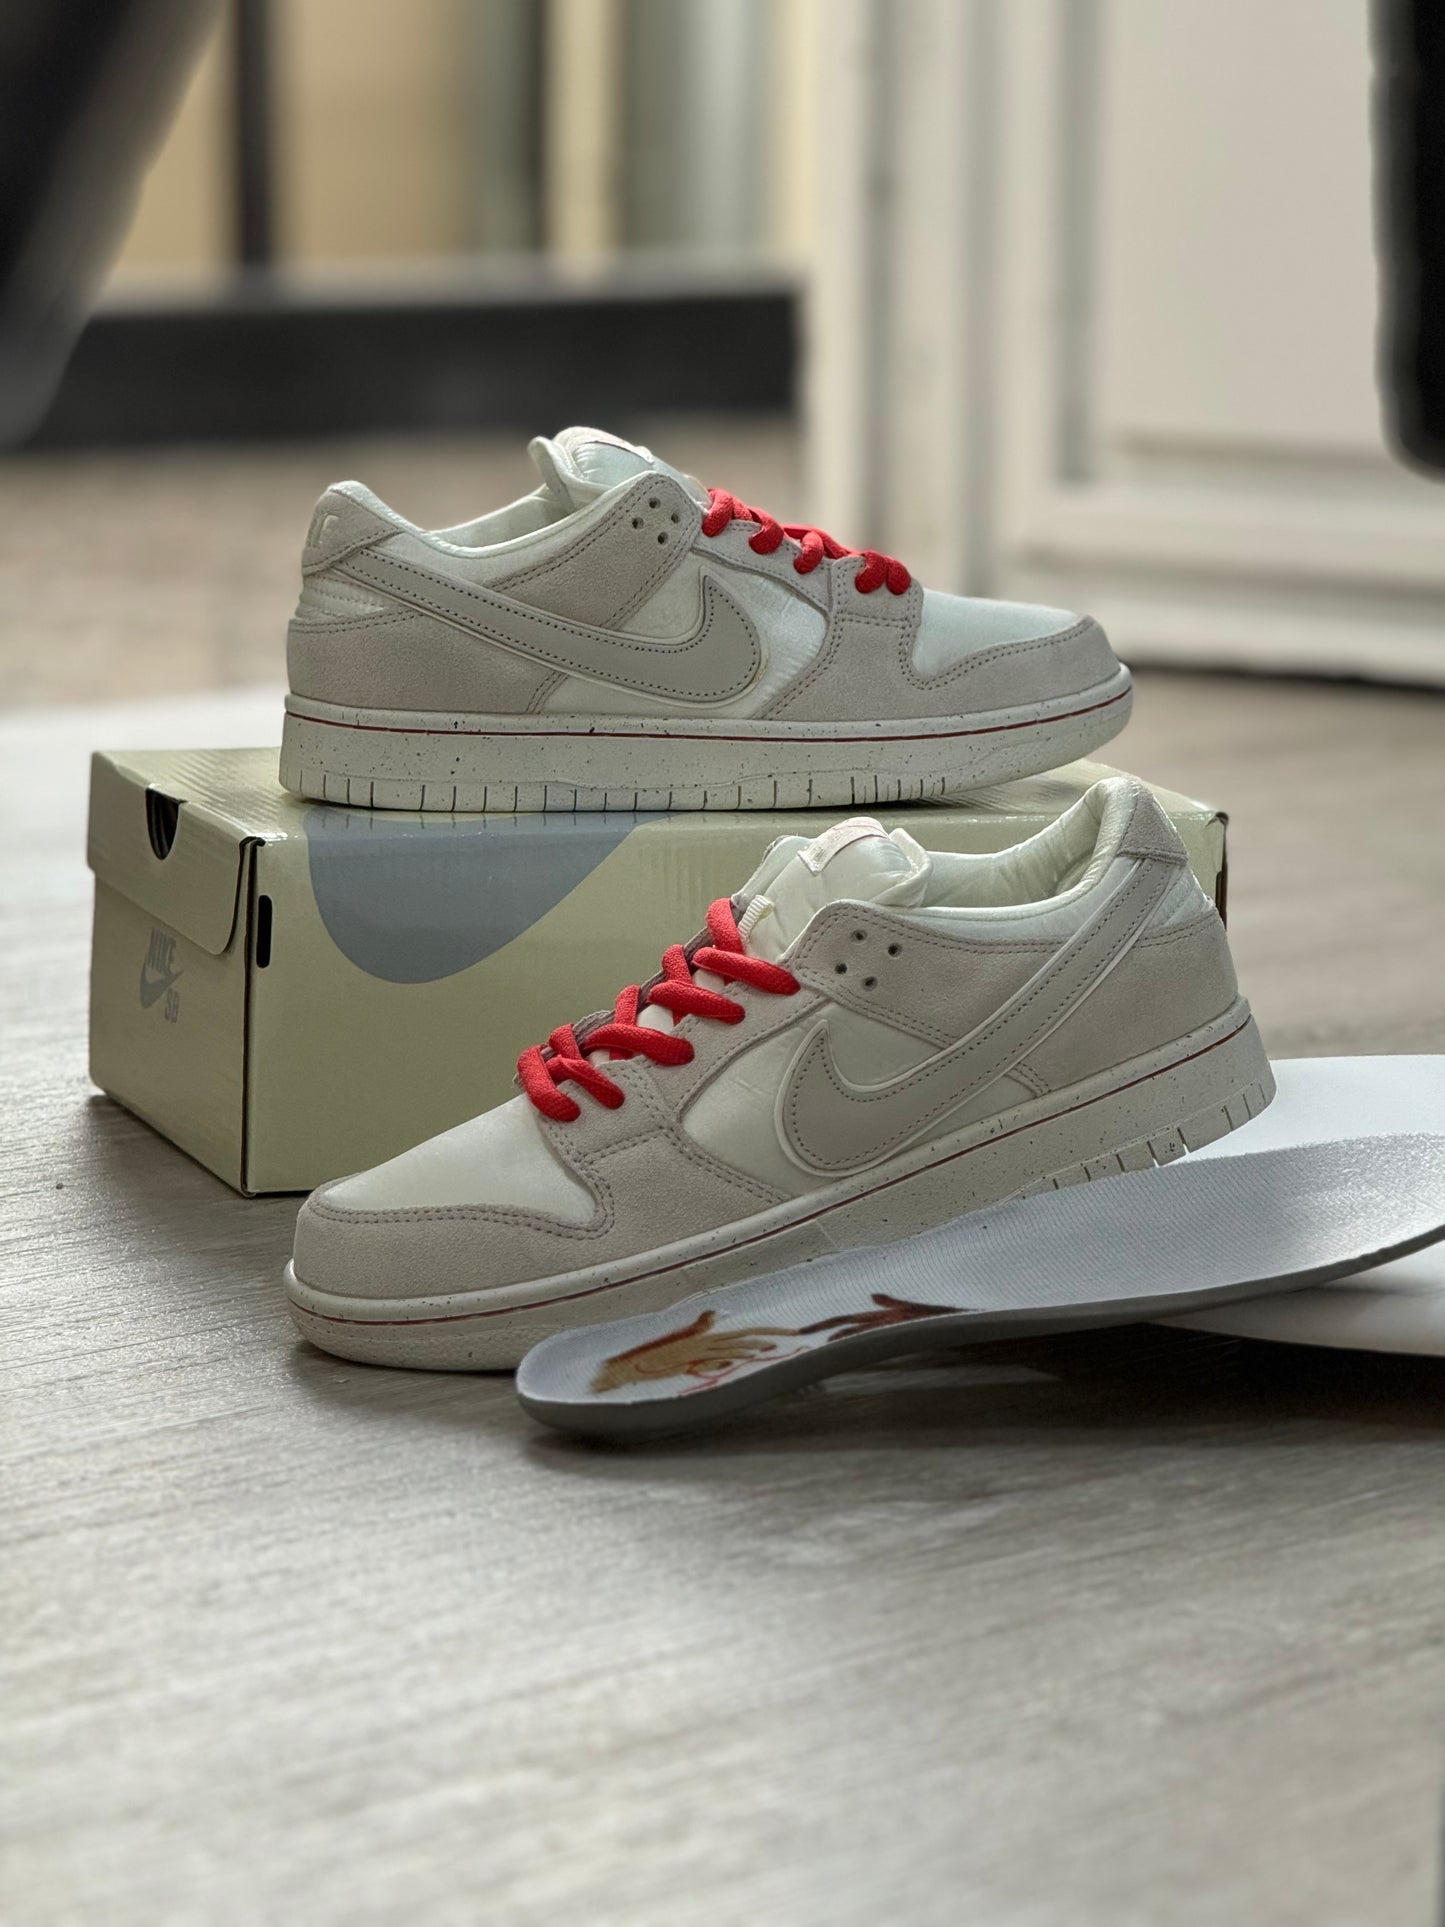 Nike SB Dunk Low City of Love Pack